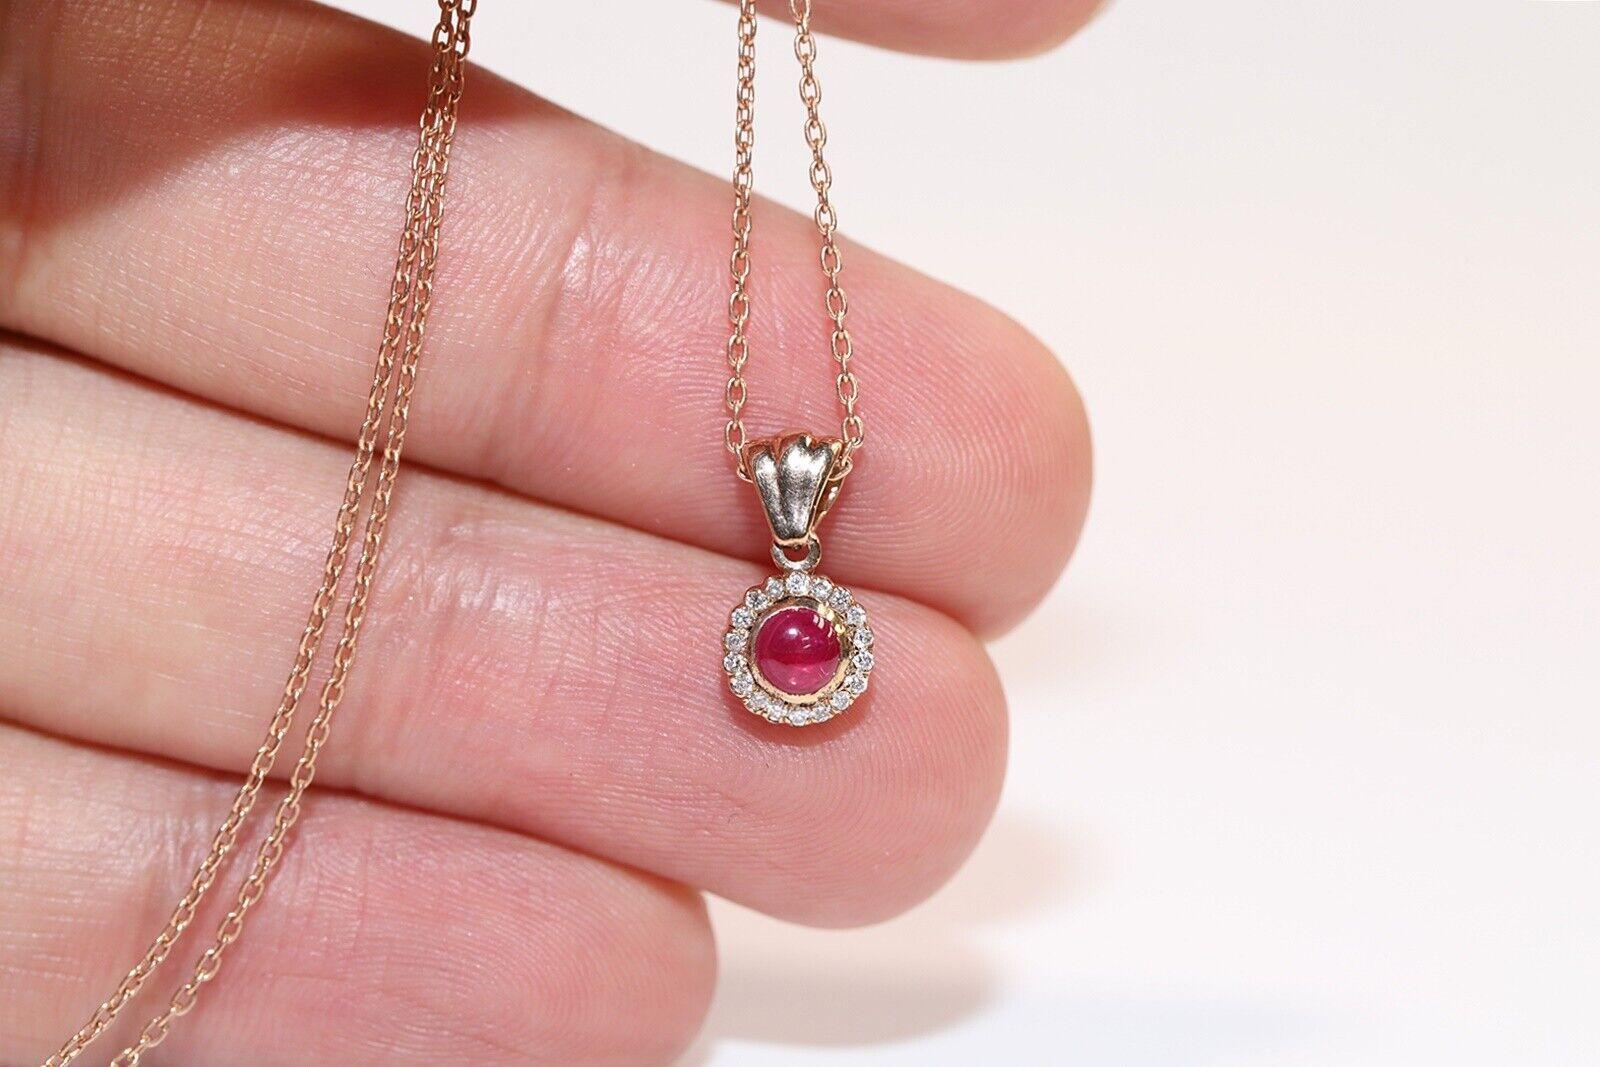 Vintage Circa 1990s 8k Gold Natural Diamond And Cabochon Ruby Pendant Necklace In Good Condition For Sale In Fatih/İstanbul, 34